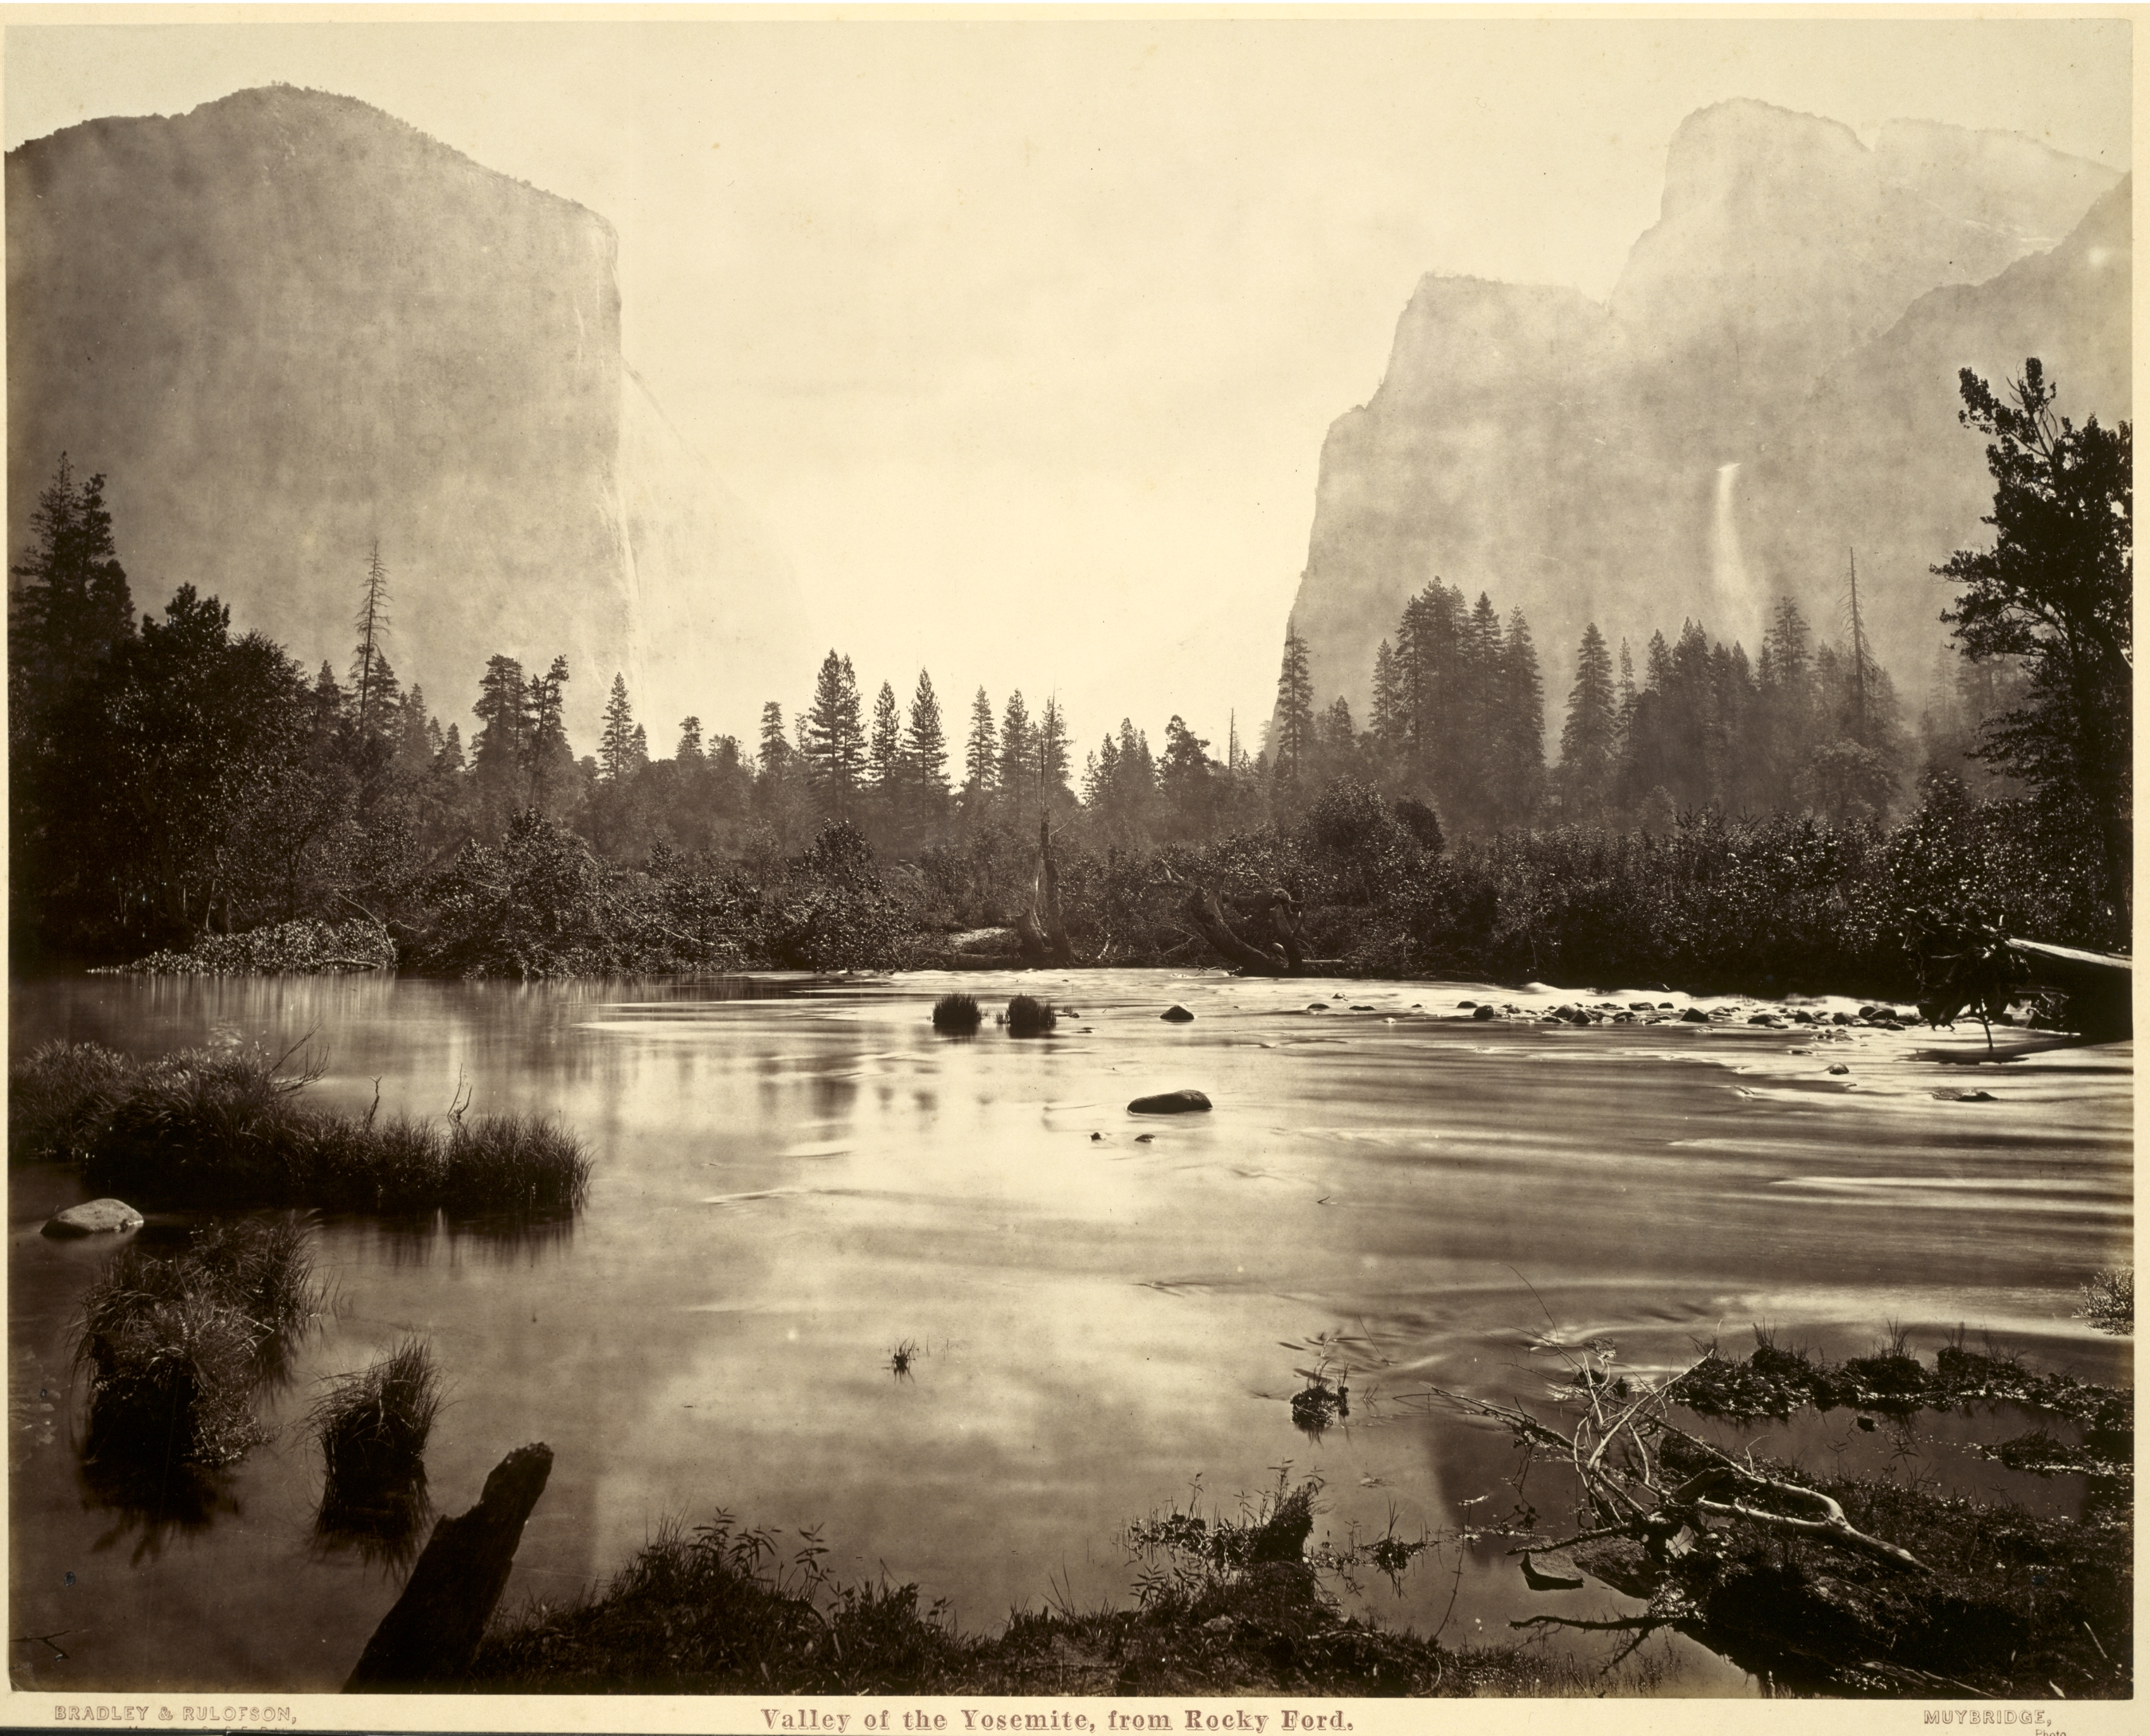 Valley of the Yosemite, from Rocky Ford